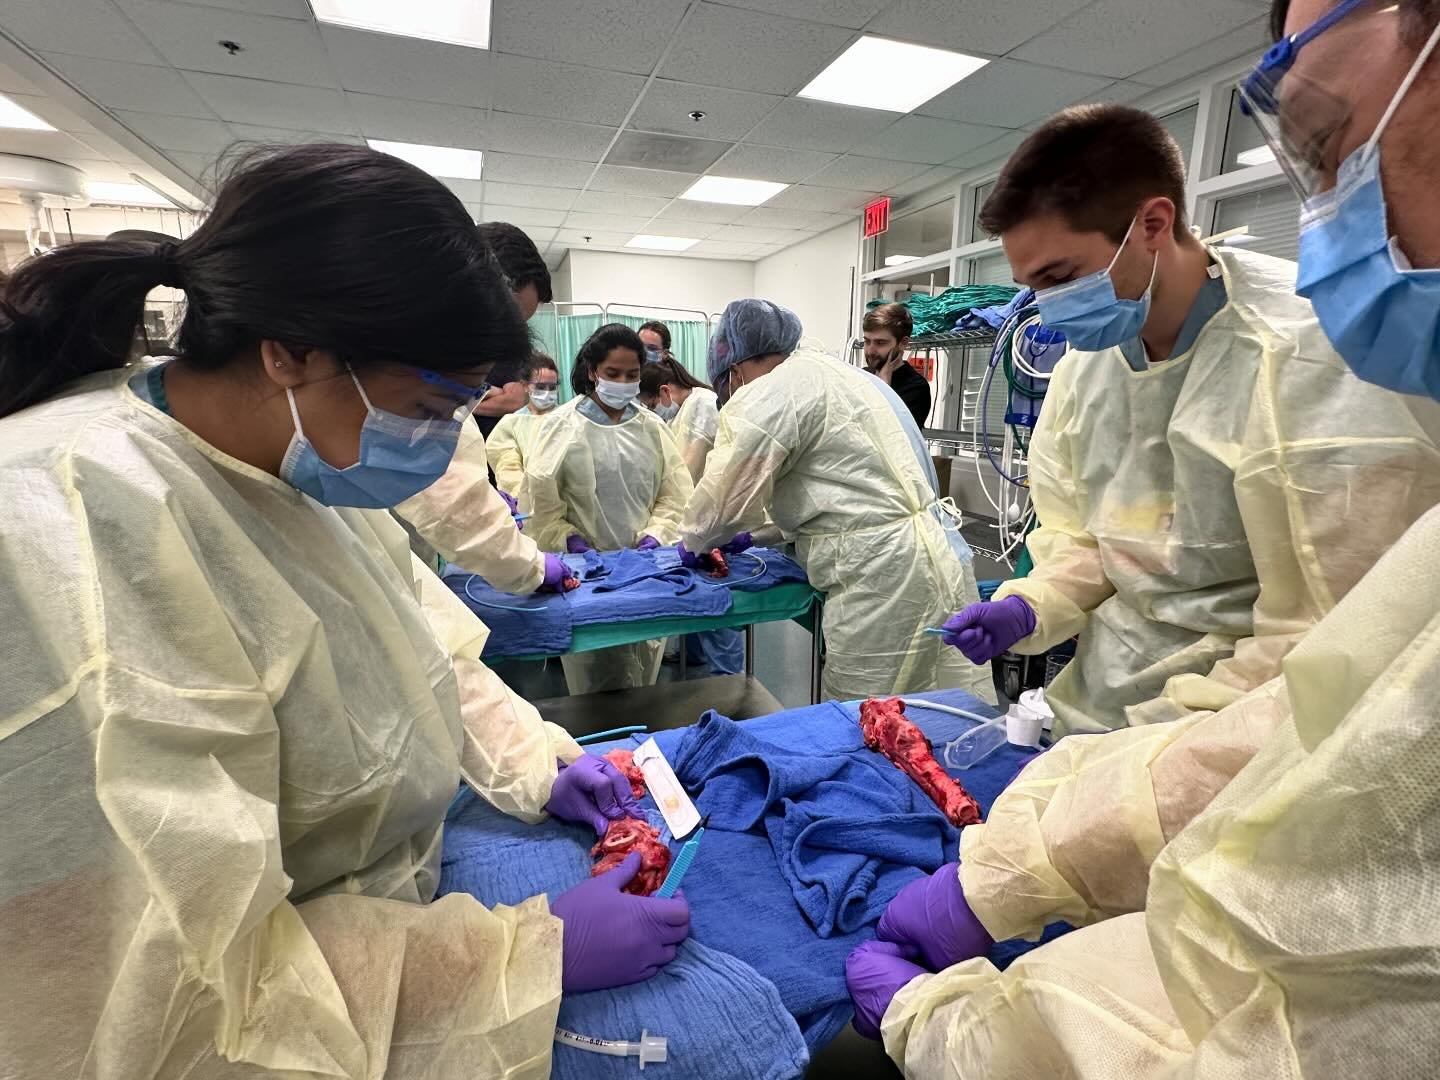 One of our #EMconf favorites, Cadaver lab/#HALO procedure day with lots of great hands-on learning! Huge thank you to our many EM faculty &amp; amazing trauma colleagues for their time and expertise, and shoutout to #MedEd fellows @ecraft15 &amp; @ml